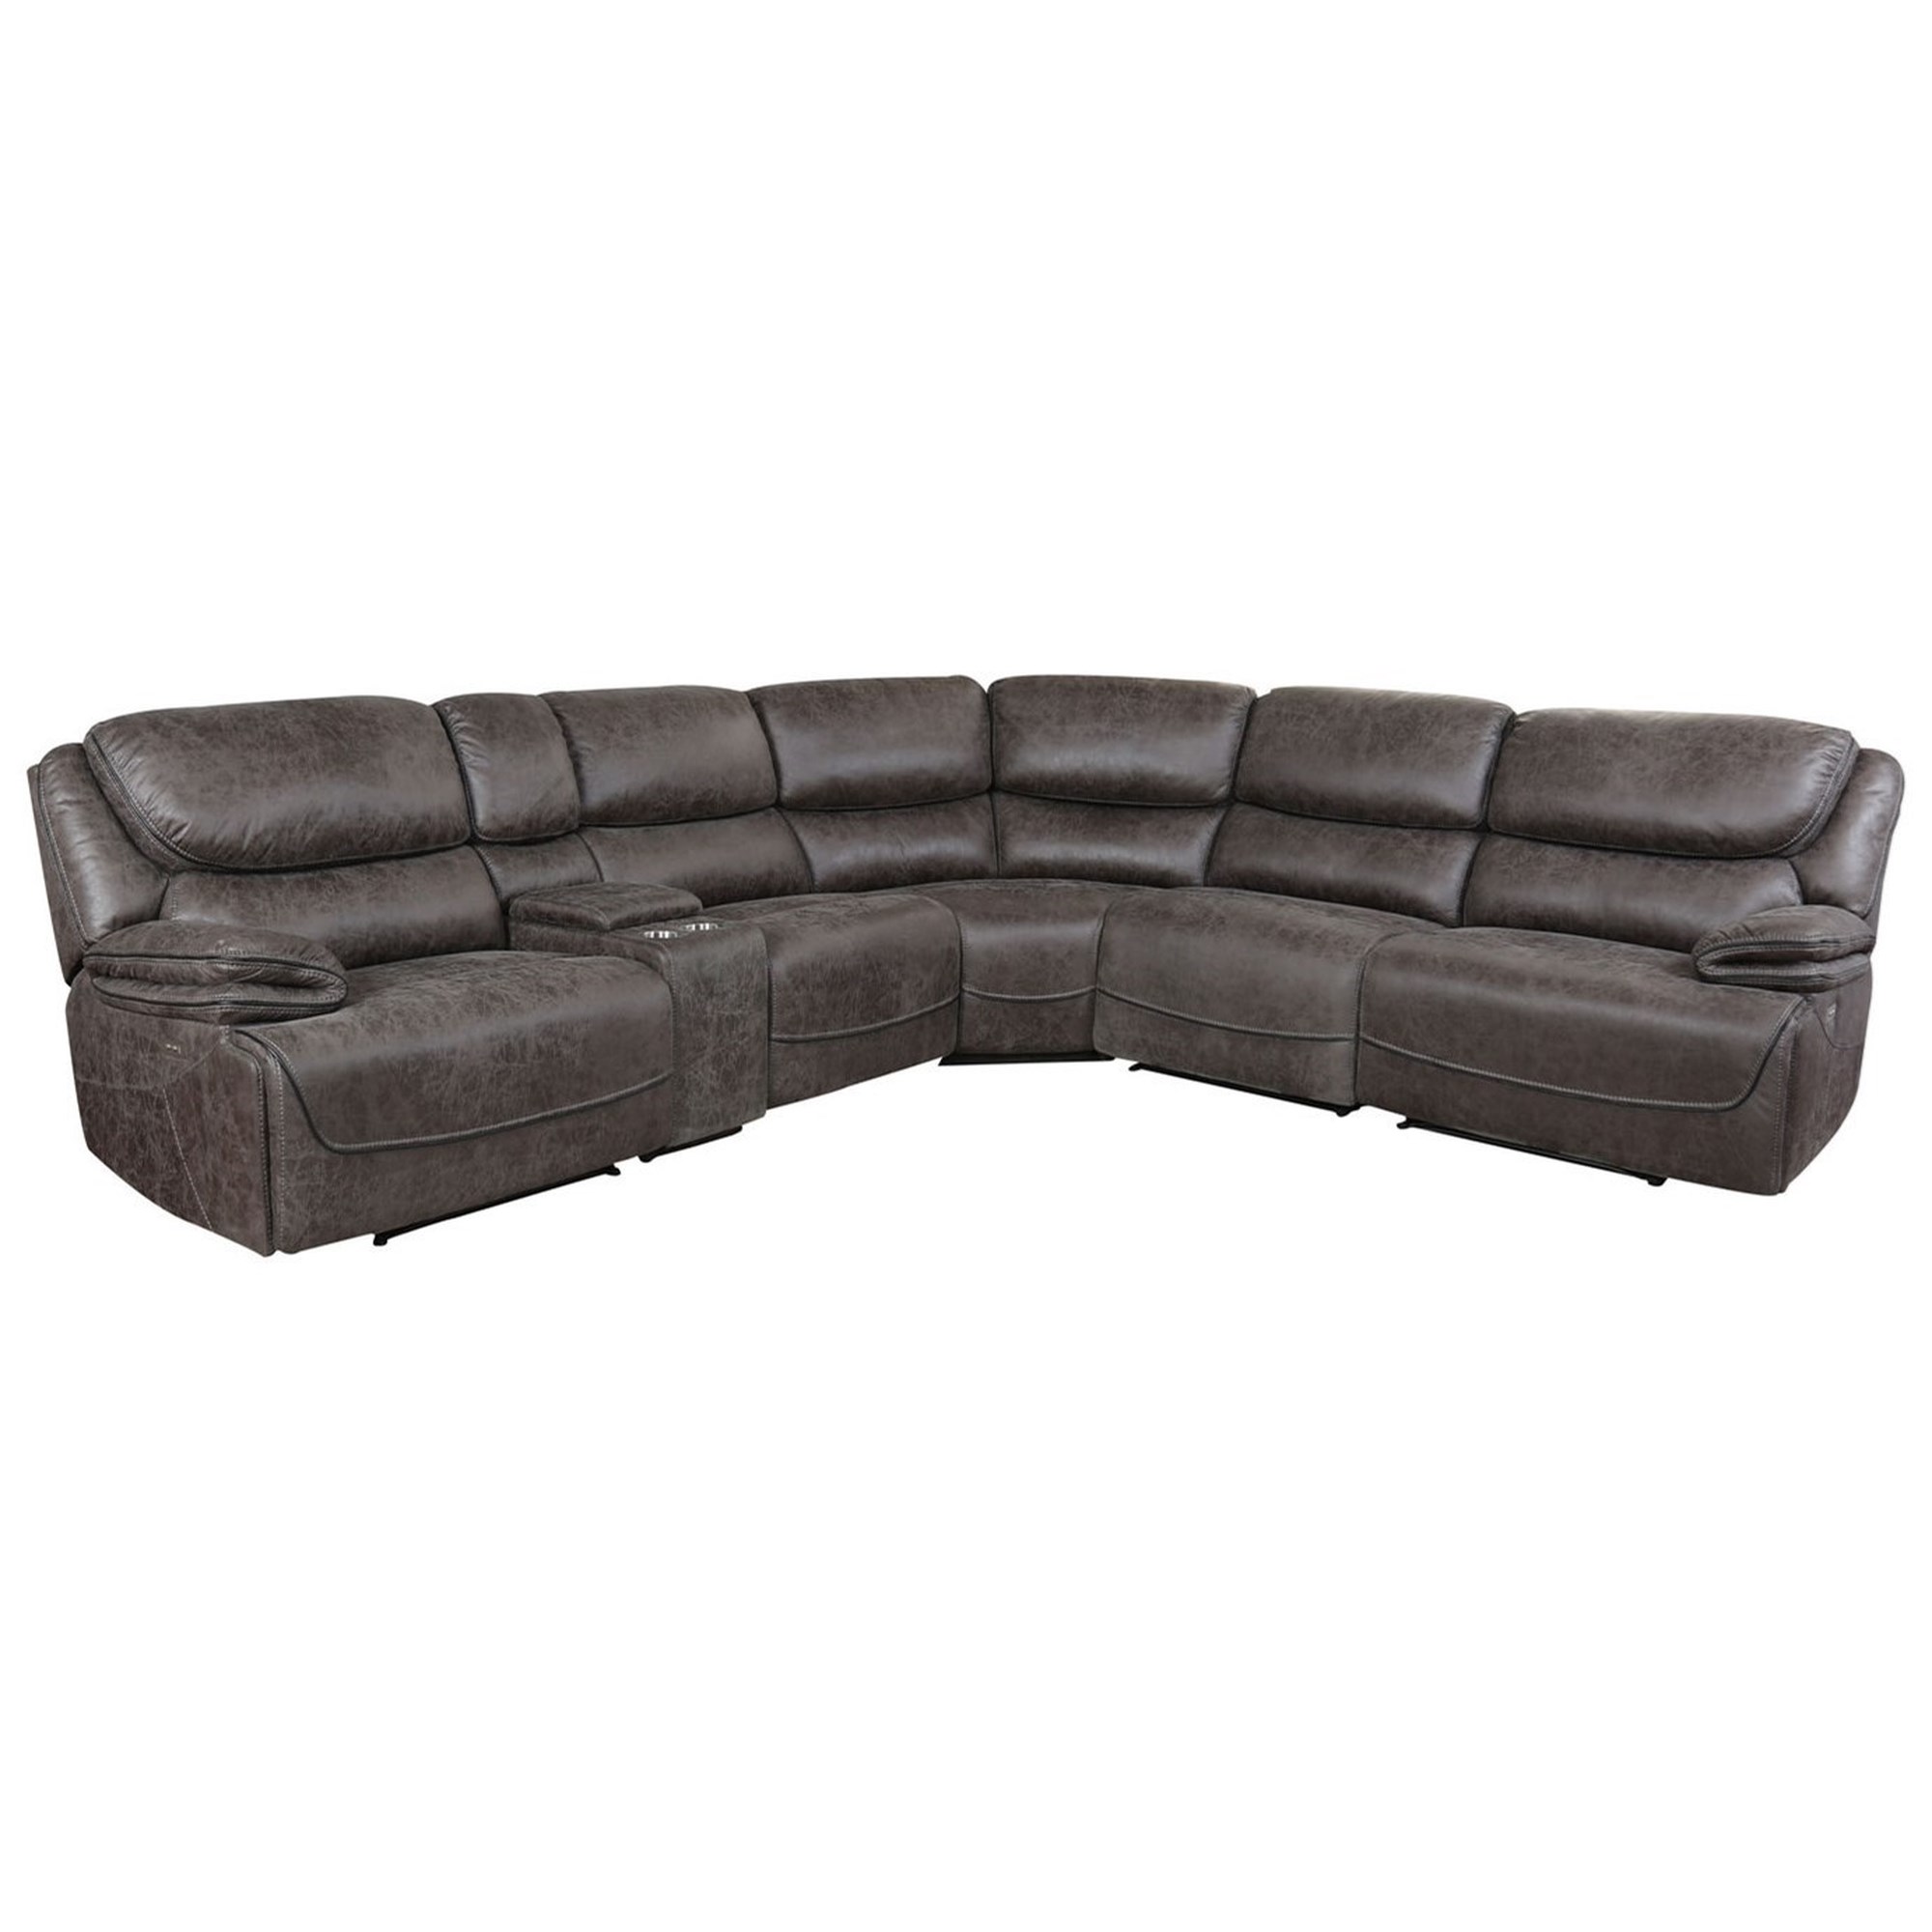 Recliner Sofa With Cup Holders - Foter